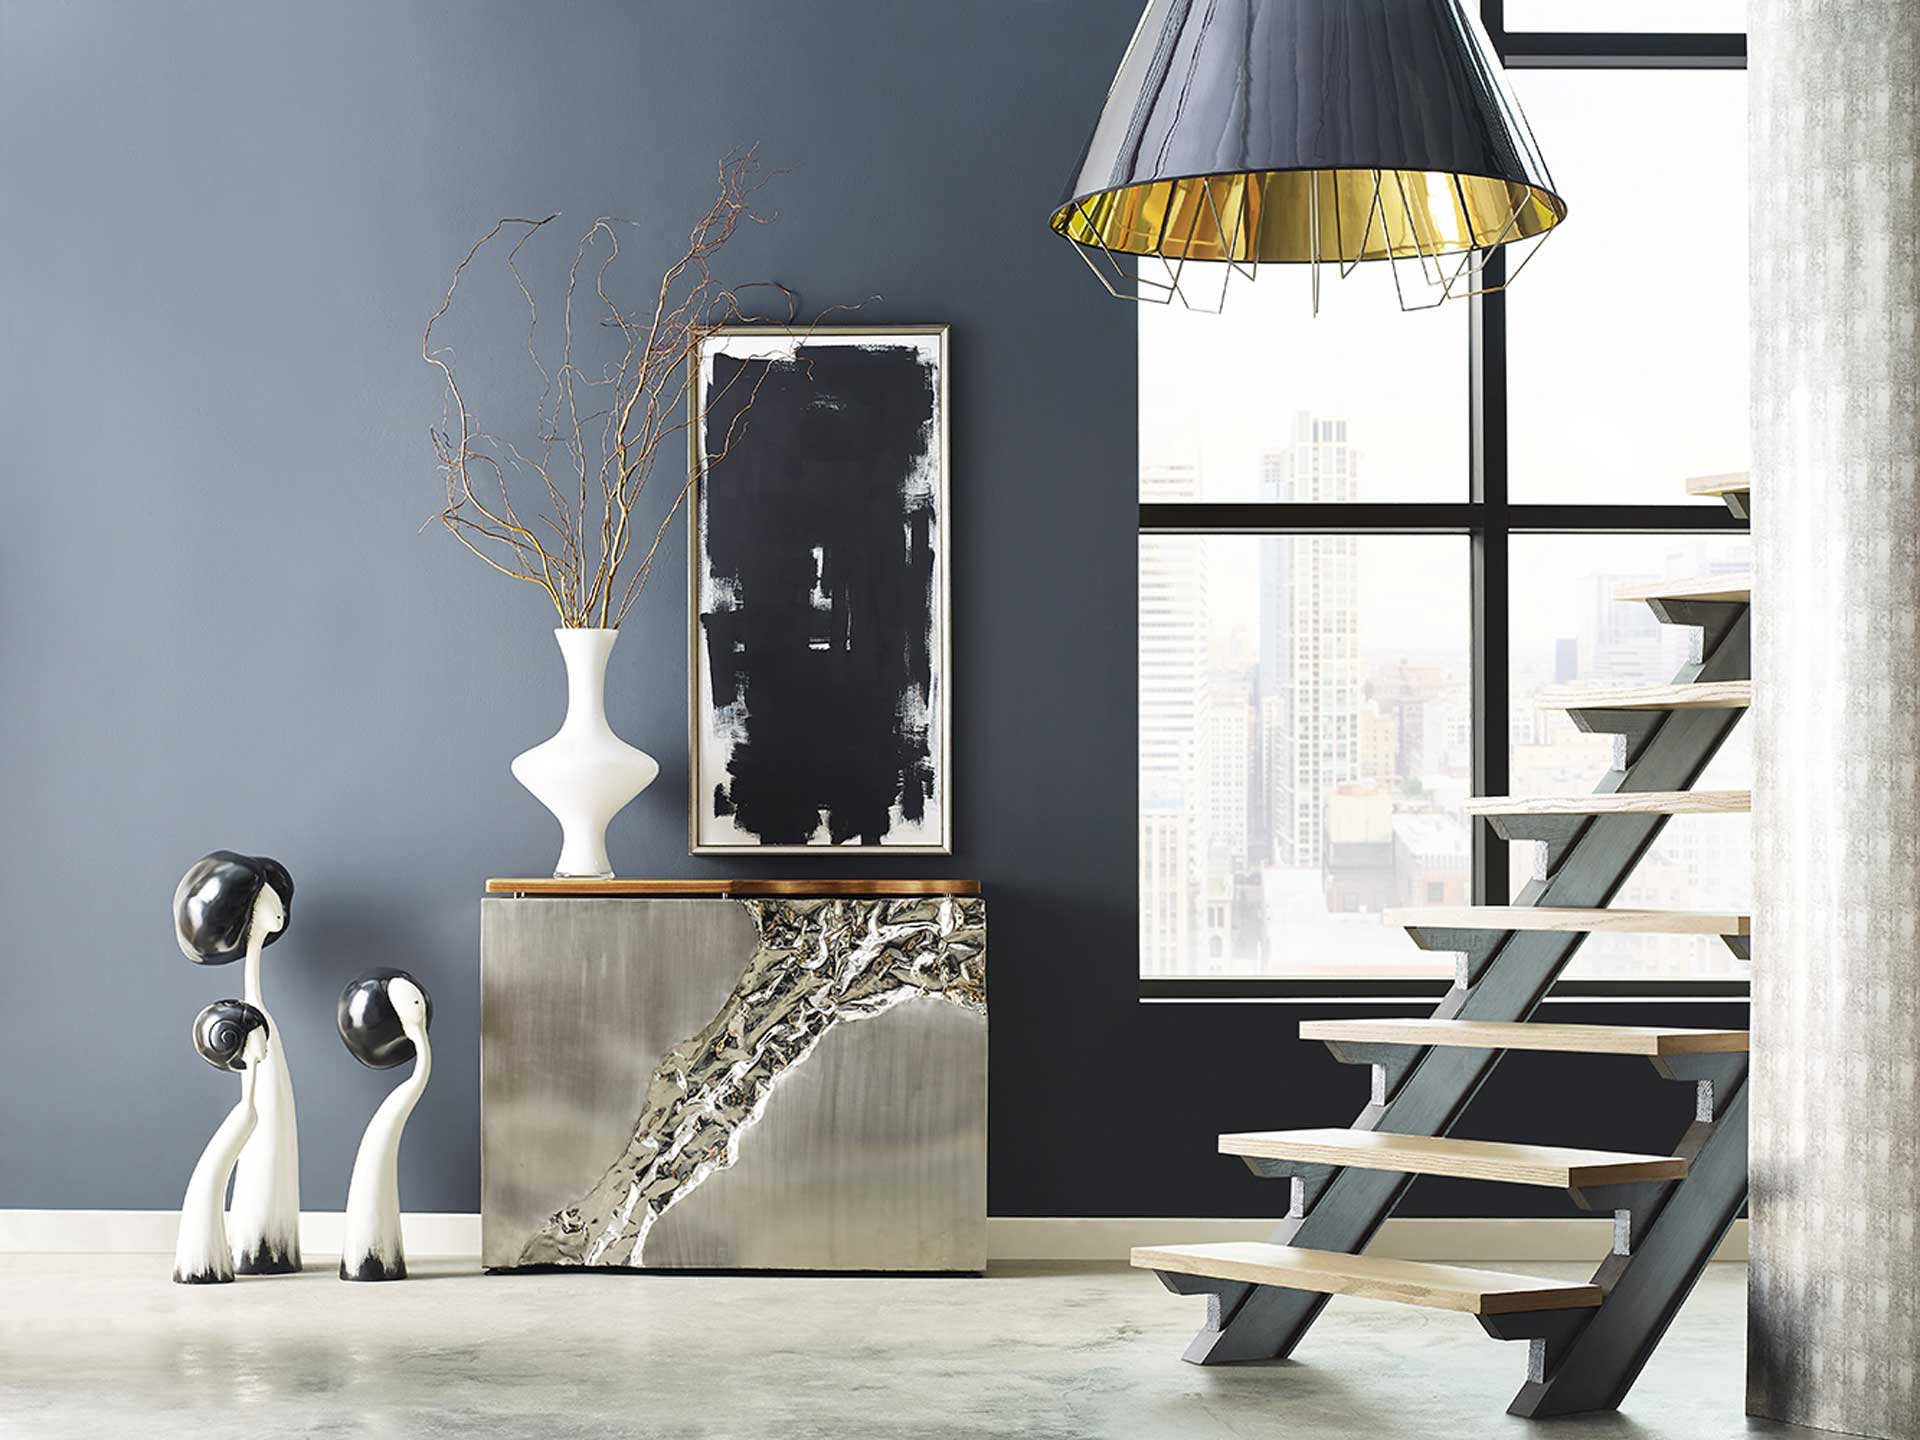 Sherwin-Williams Color Forecast for 2021 Revealed